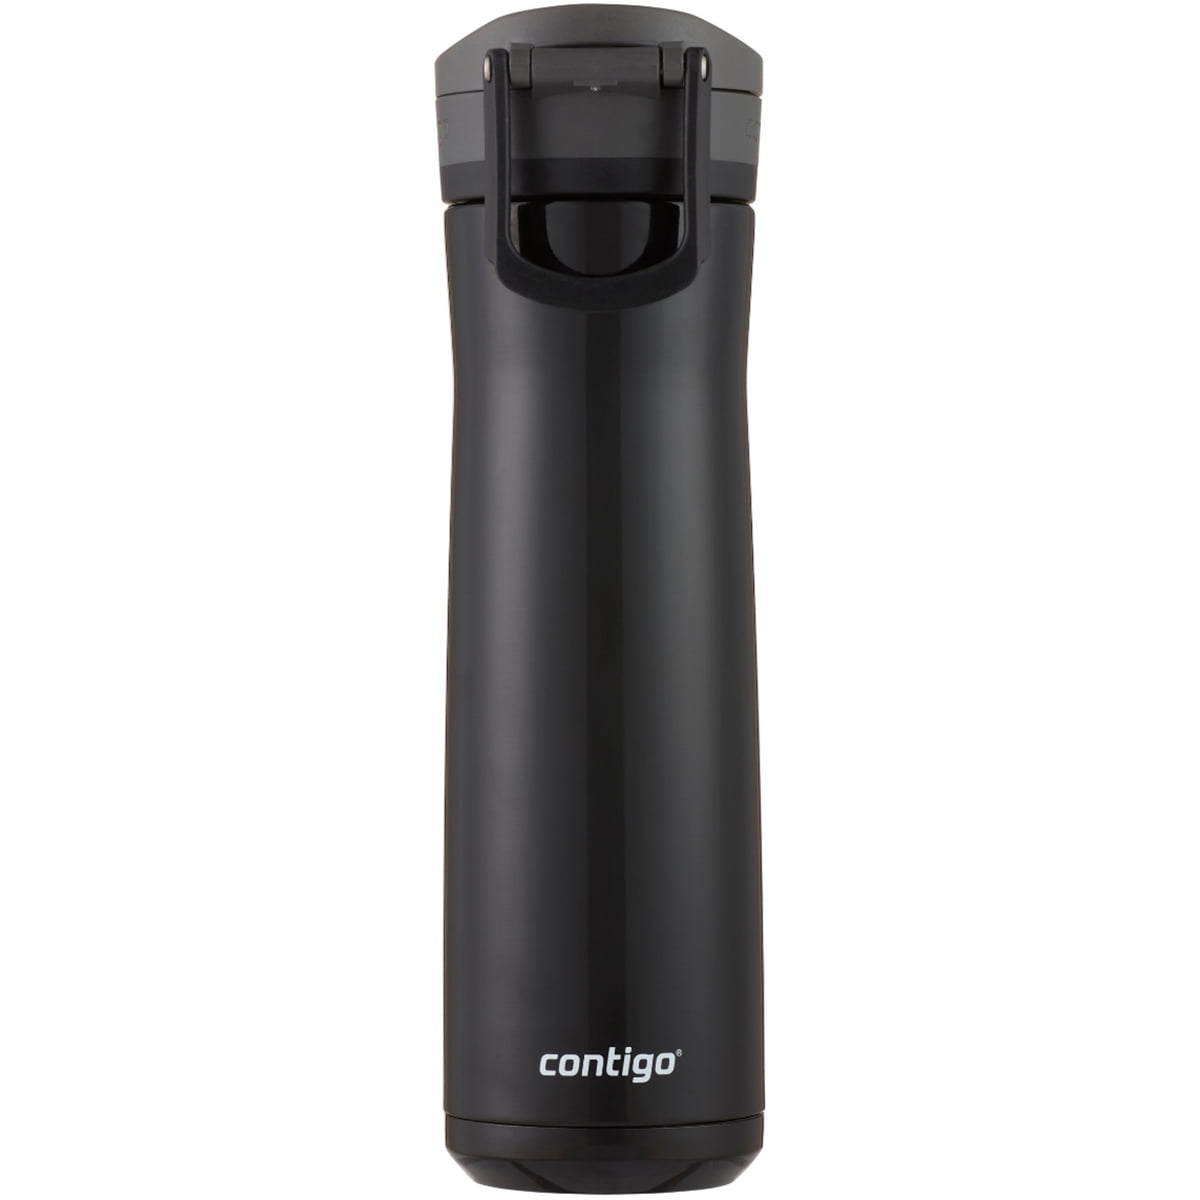  Contigo Jackson Chill 2.0 Vacuum-Insulated Stainless Steel  Water Bottle, Secure Lid Technology & Cortland Chill 2.0 Stainless Steel  Vacuum-Insulated Water Bottle with Spill-Proof Lid, Blueberry: Home &  Kitchen